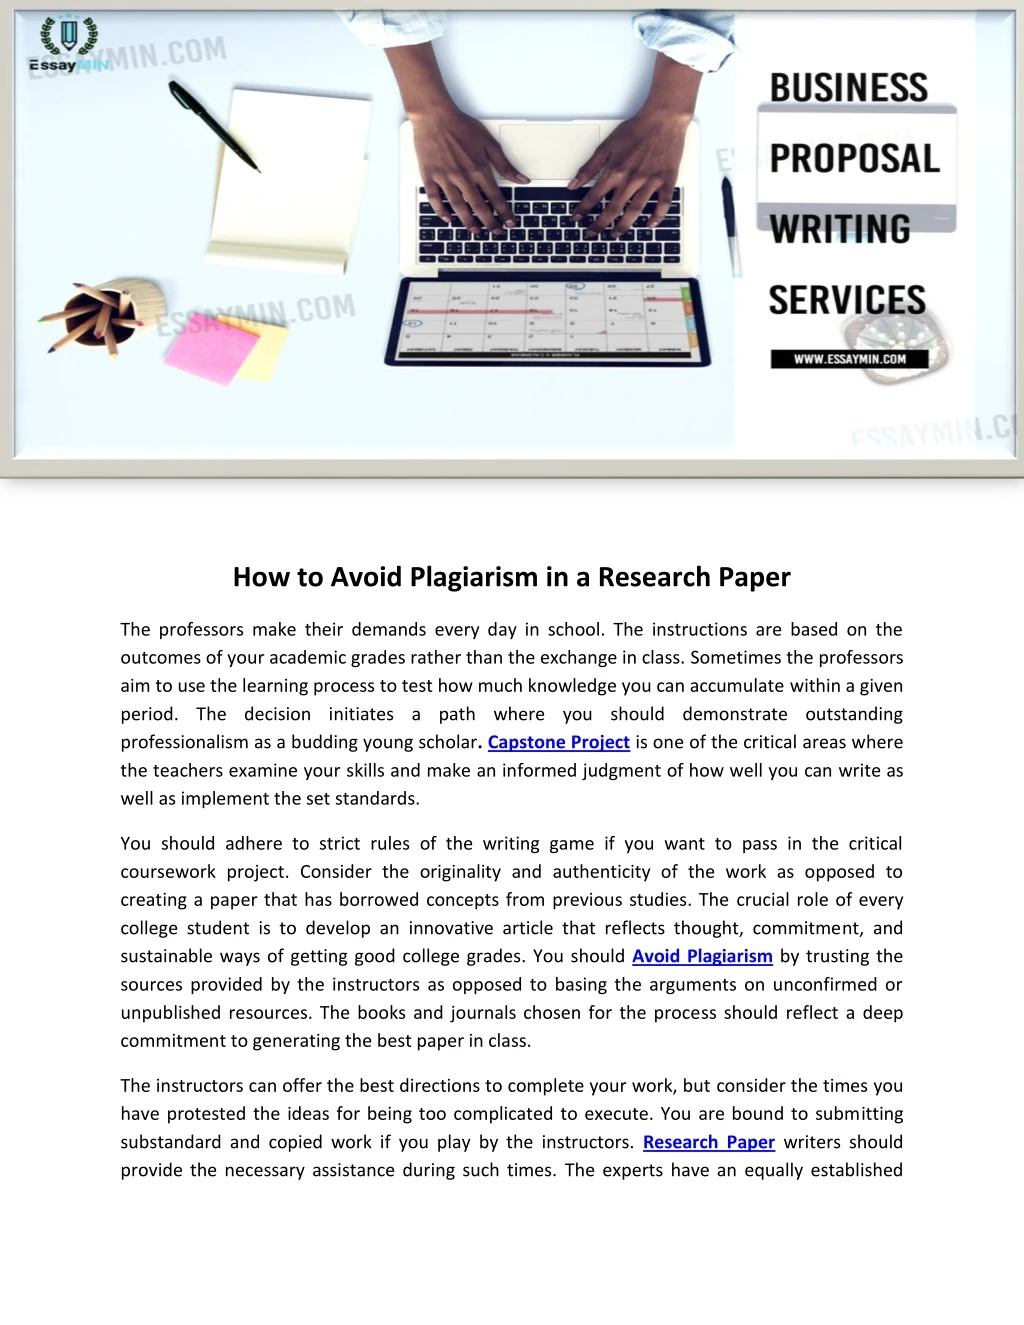 how to avoid plagiarism in a research paper